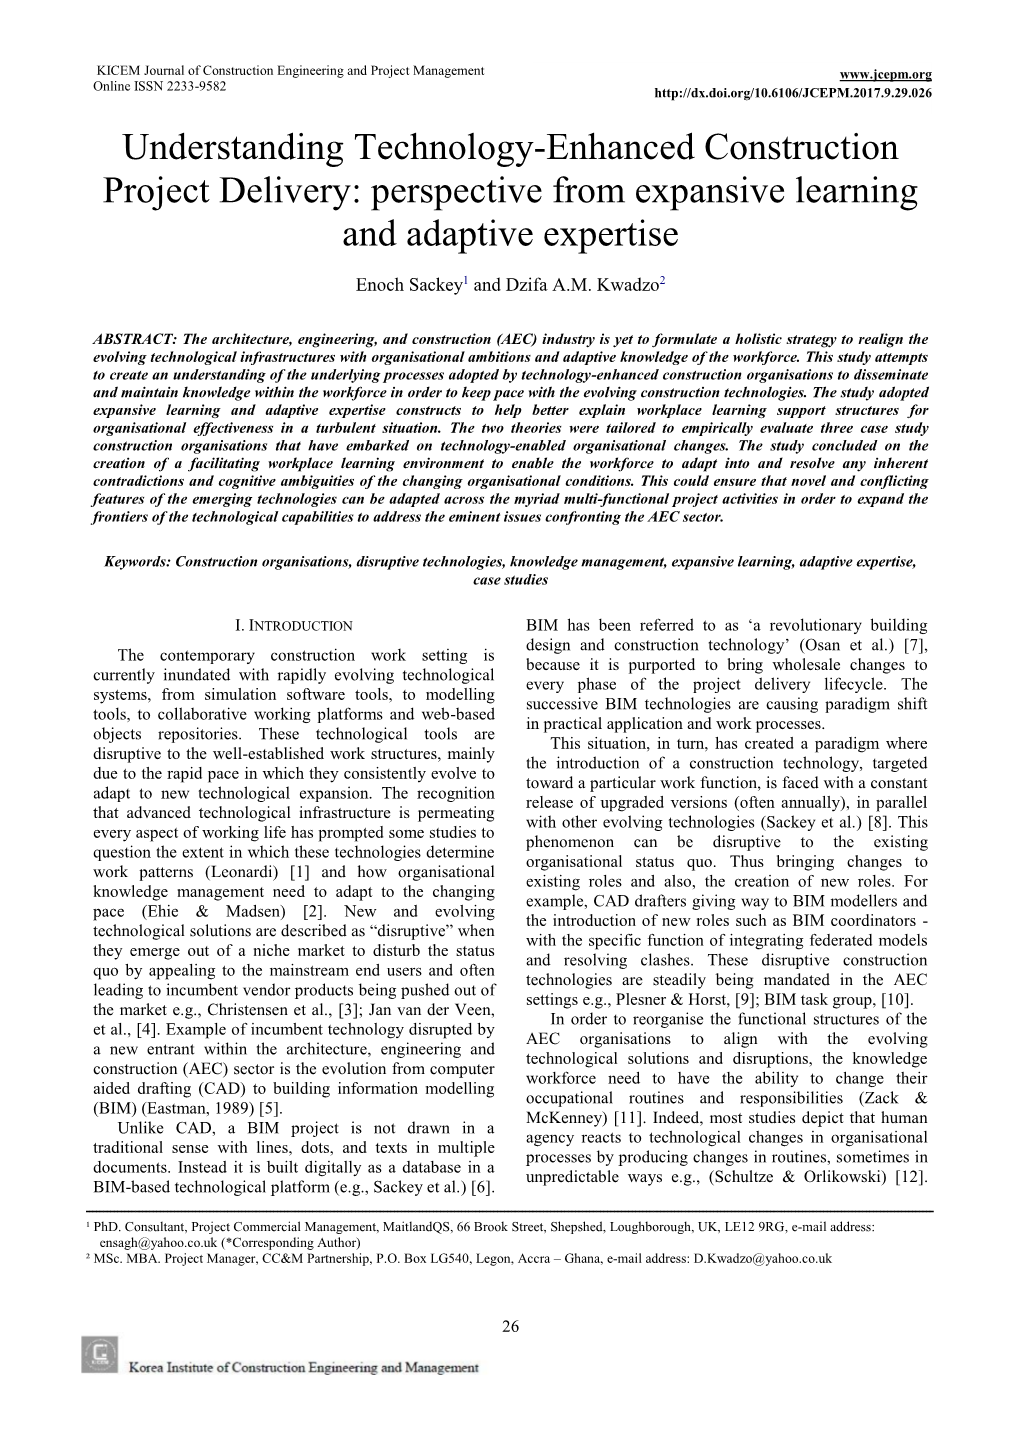 Perspective from Expansive Learning and Adaptive Expertise